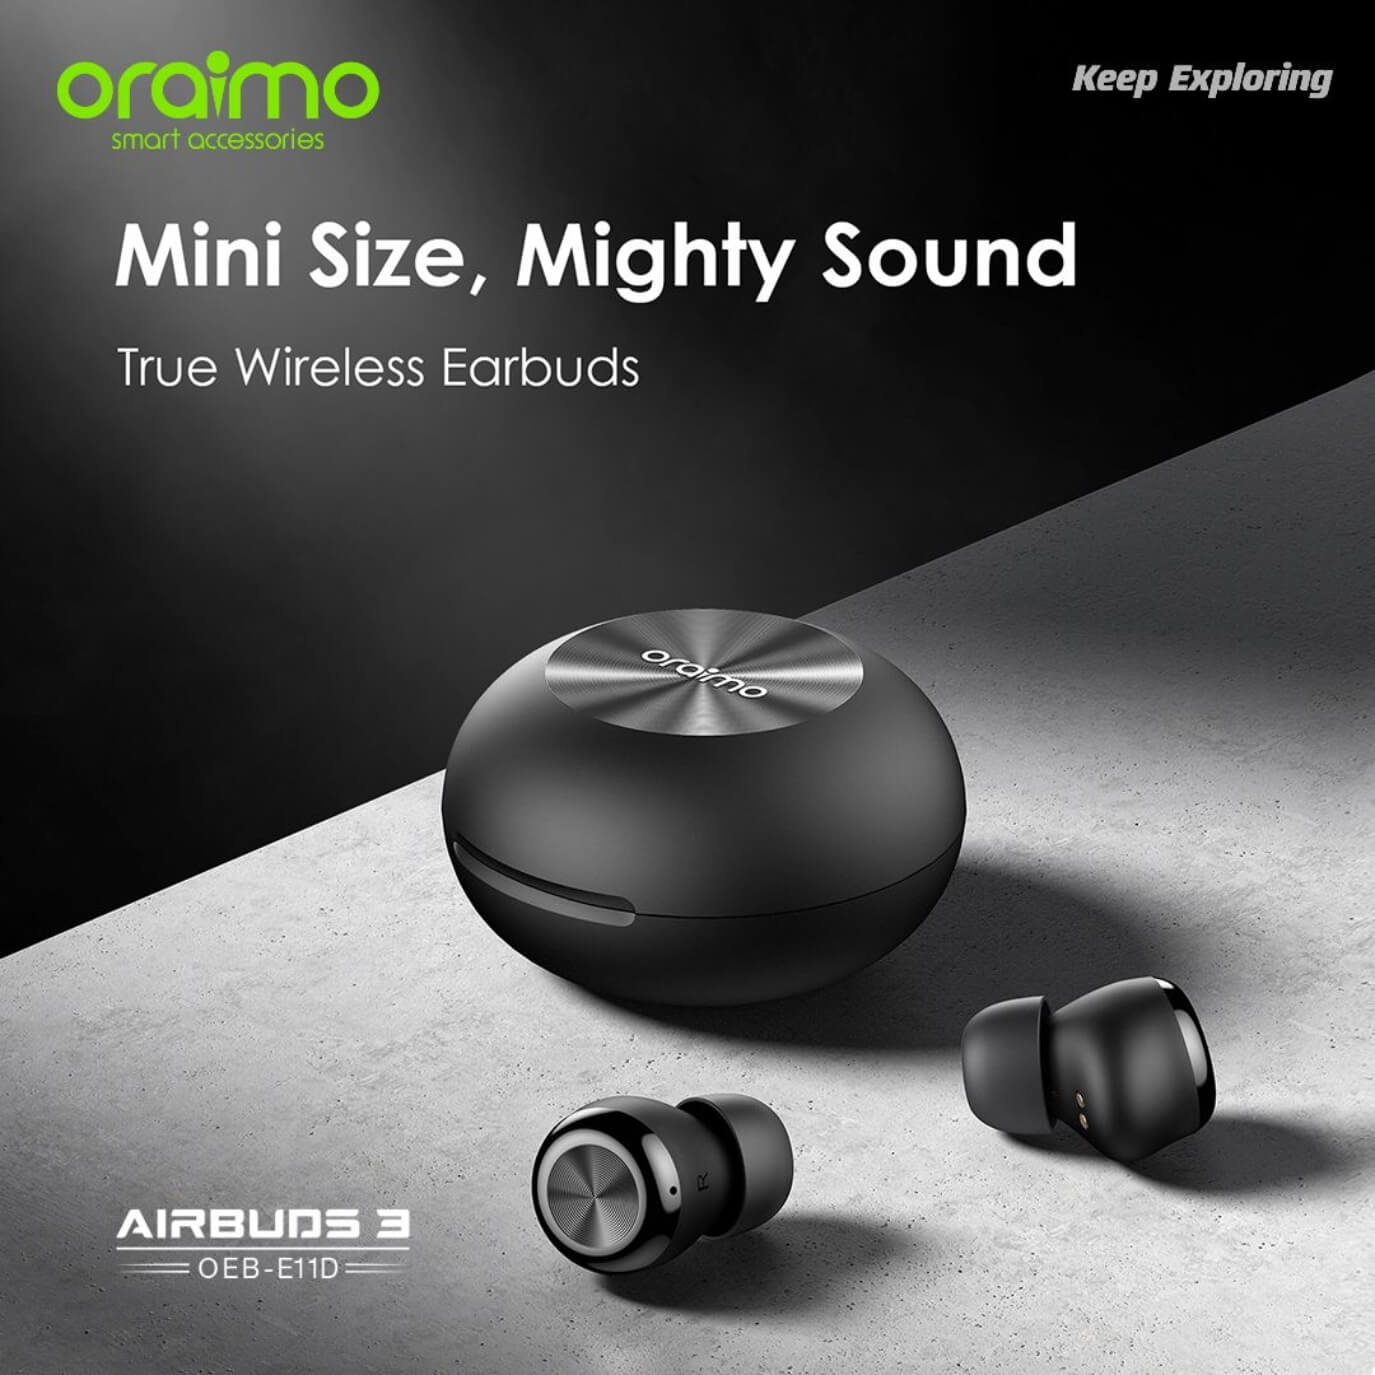 Oraimo AirBuds Earbuds Price in Bangladesh